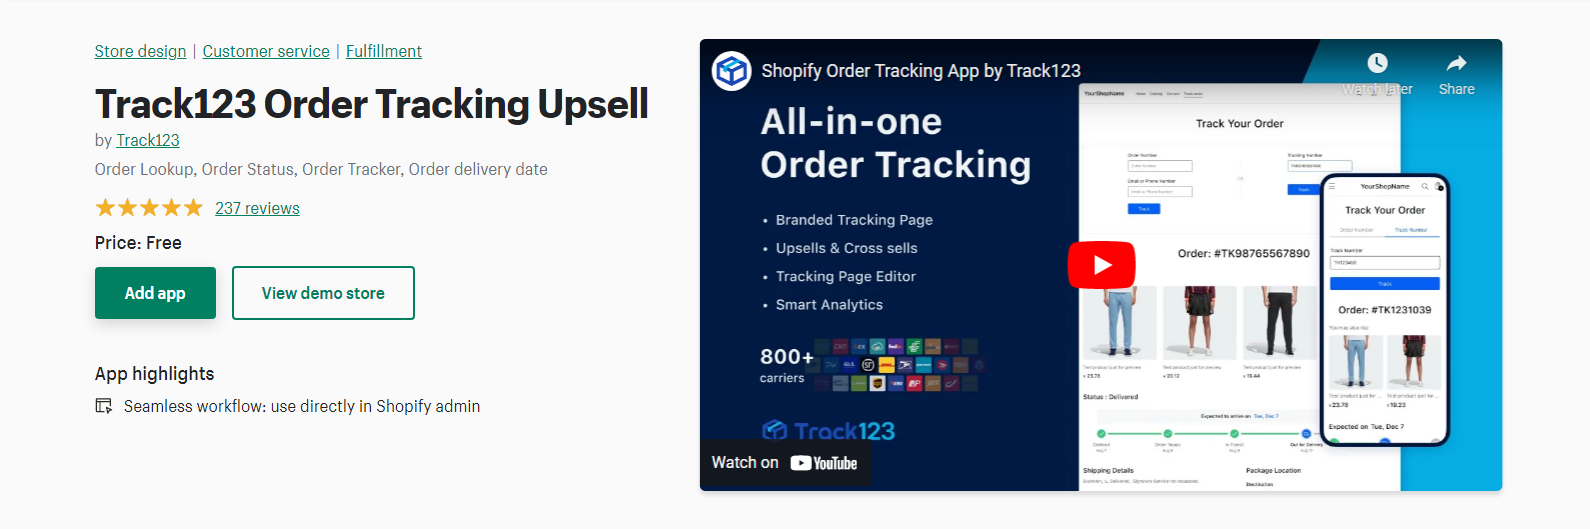 Track123 Order Tracking Upsell